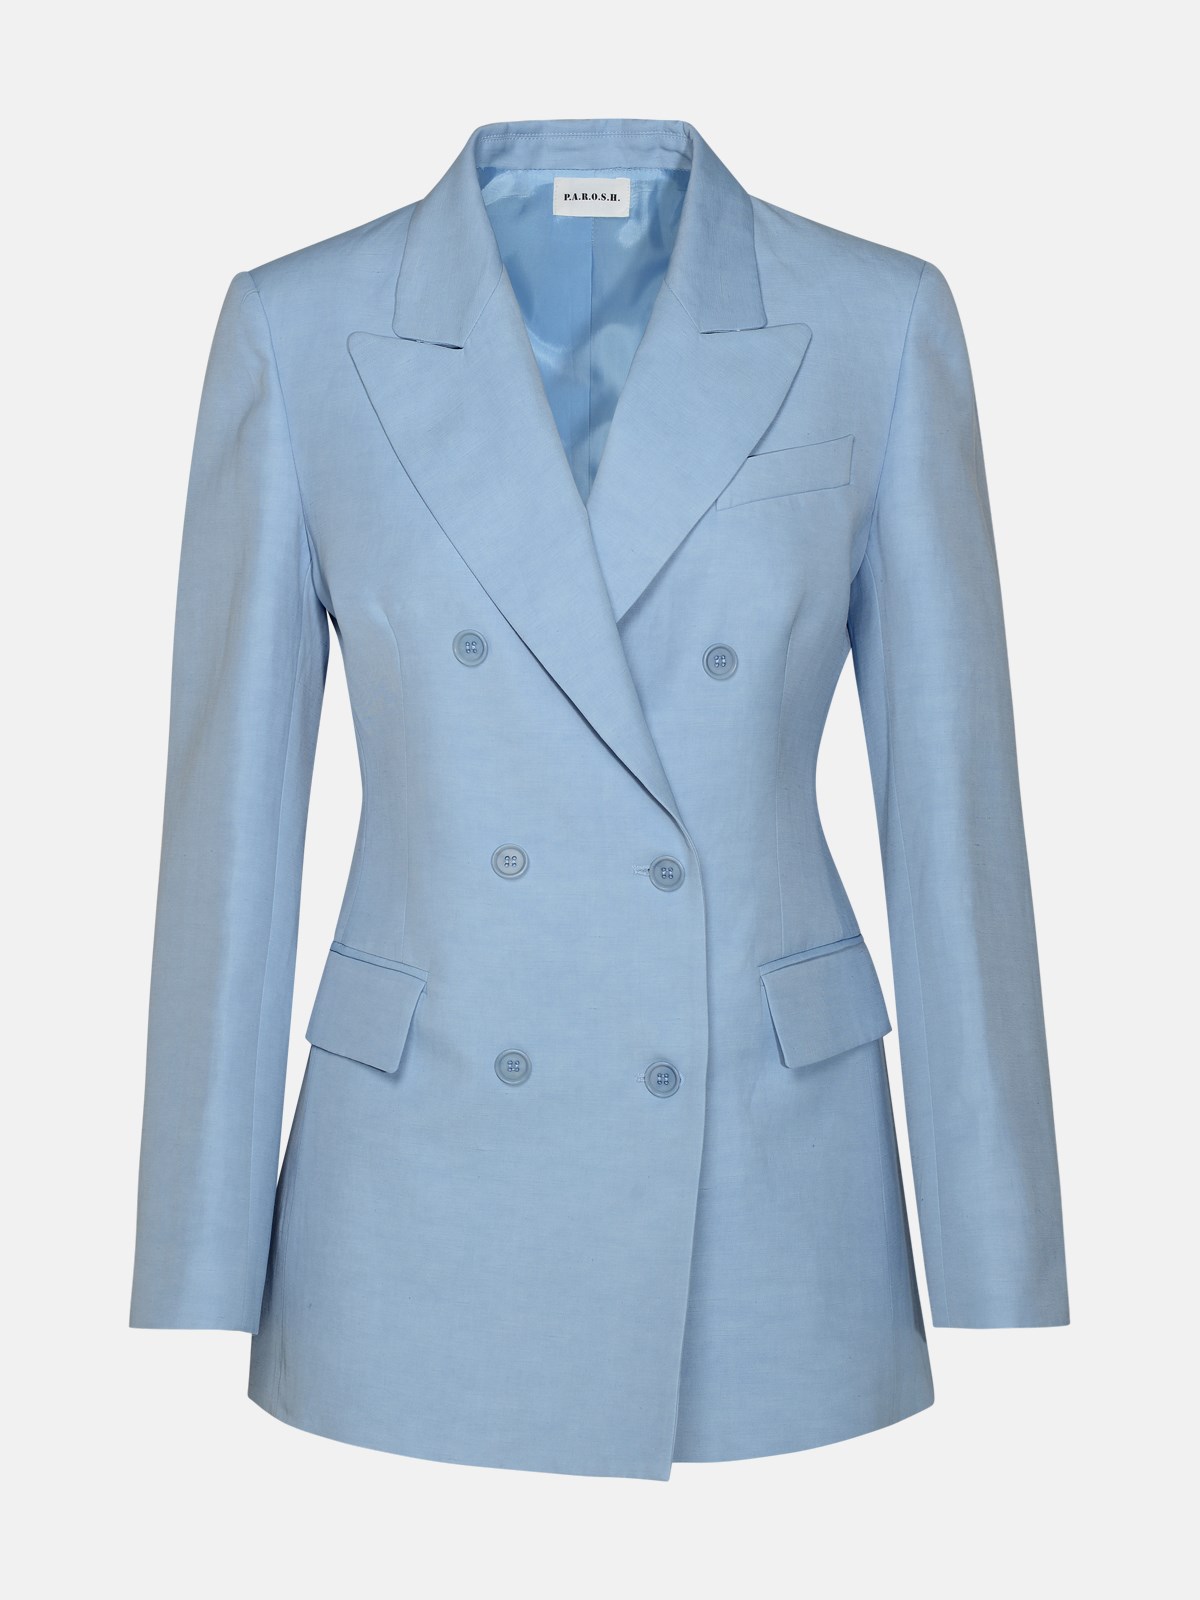 P.a.r.o.s.h 'raisa' Double-breasted Jacket In Light Blue Linen Blend